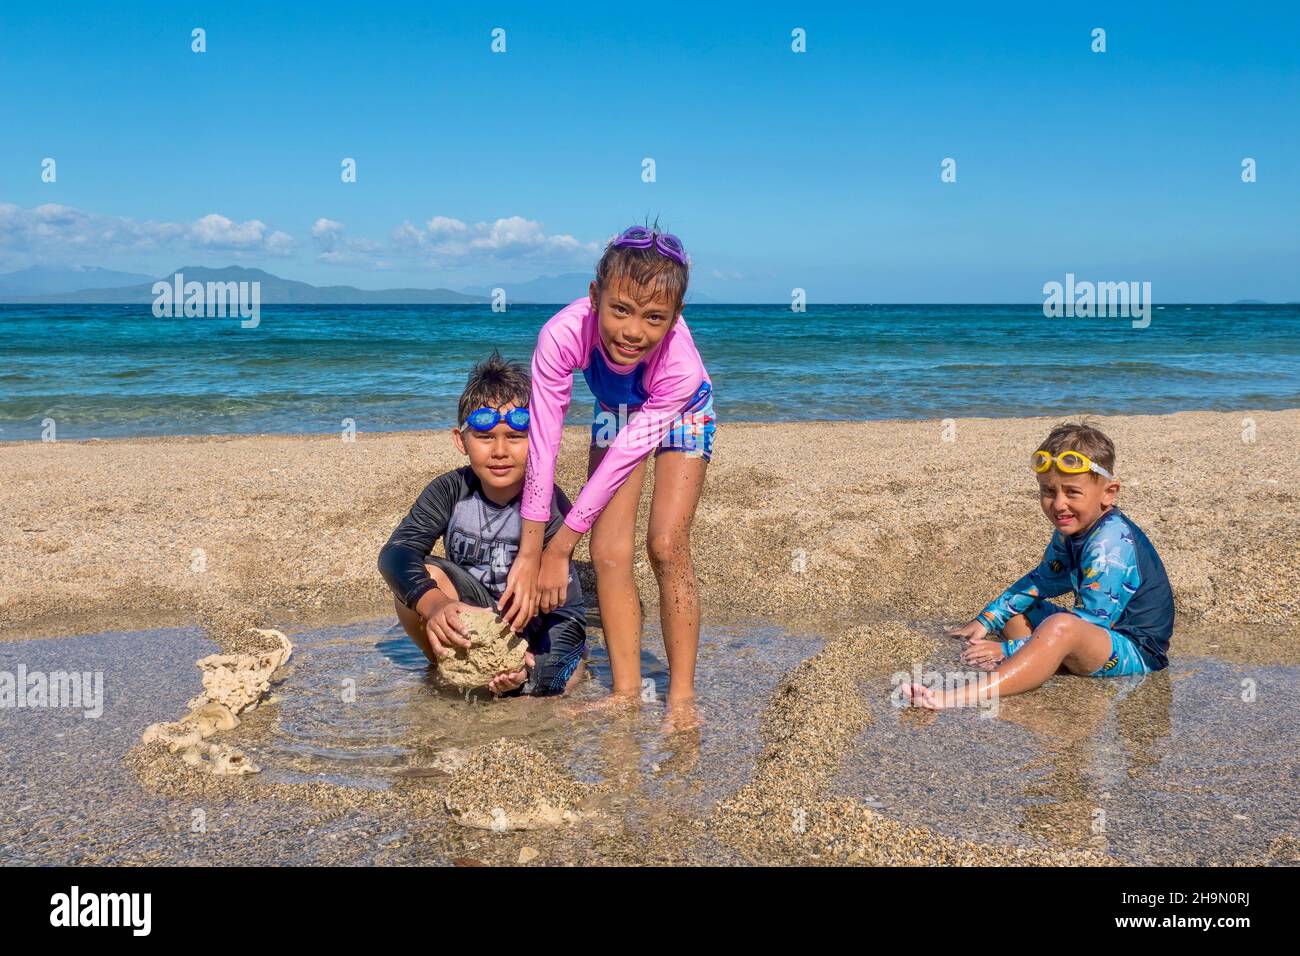 Three cute kids playing on a sandy beach on an island in the Philippines during a family summer vacation. The girl is Asian, the two boys are Eurasian Stock Photo